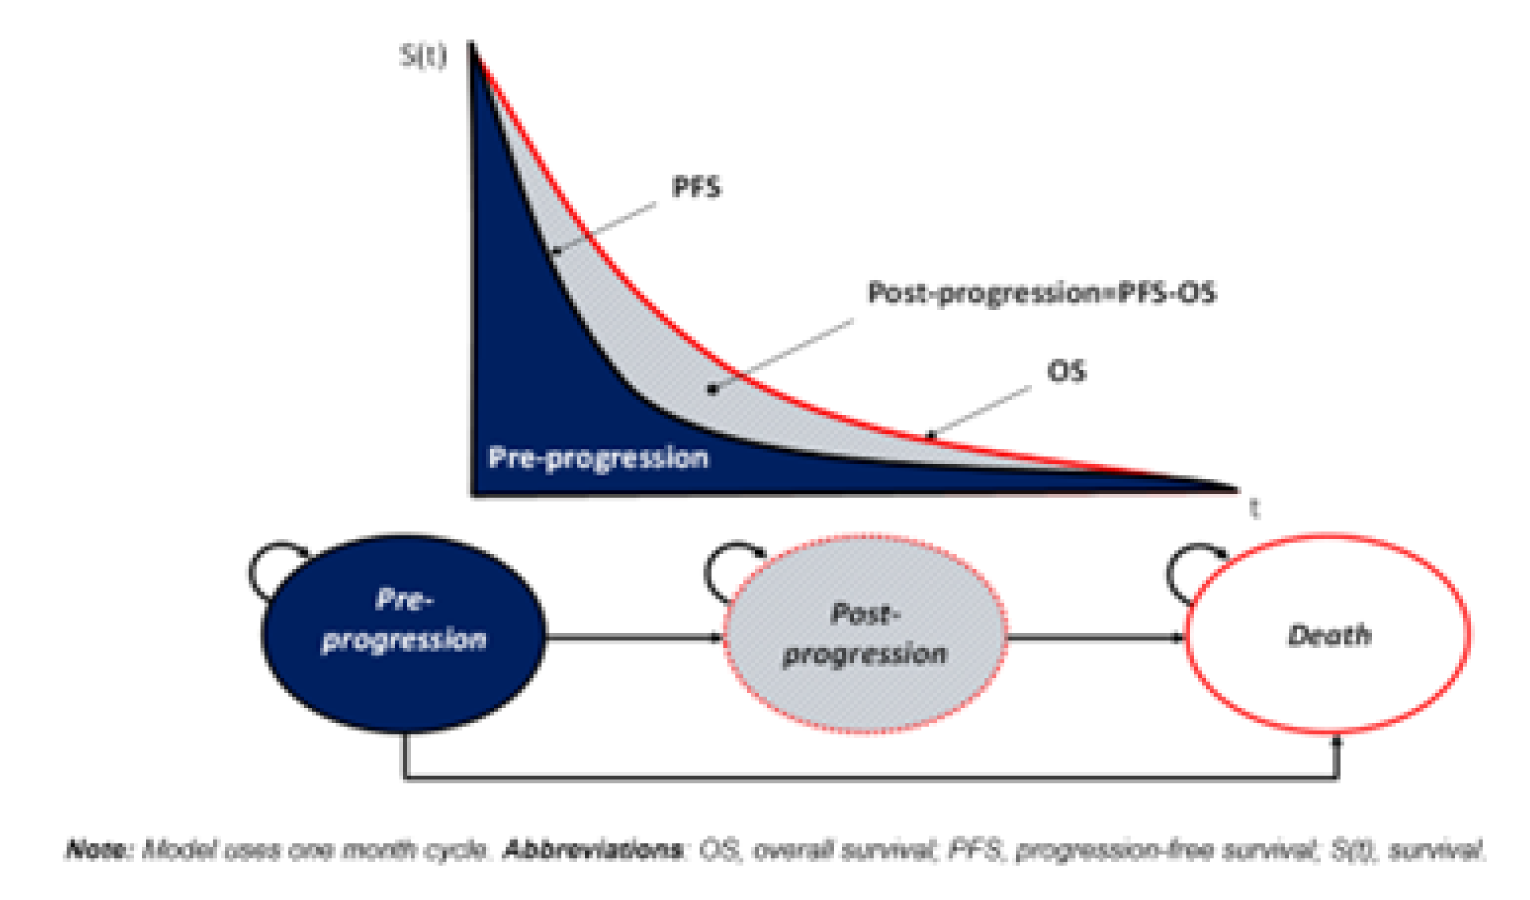 Depicts the sponsor’s 3-state PSM structure, in which patients can be pre-progression, post-progression or dead. Pre-progression is determined through PFS, and post-progression is determined as the area under the curve between OS and PFS (i.e., OS-PFS).